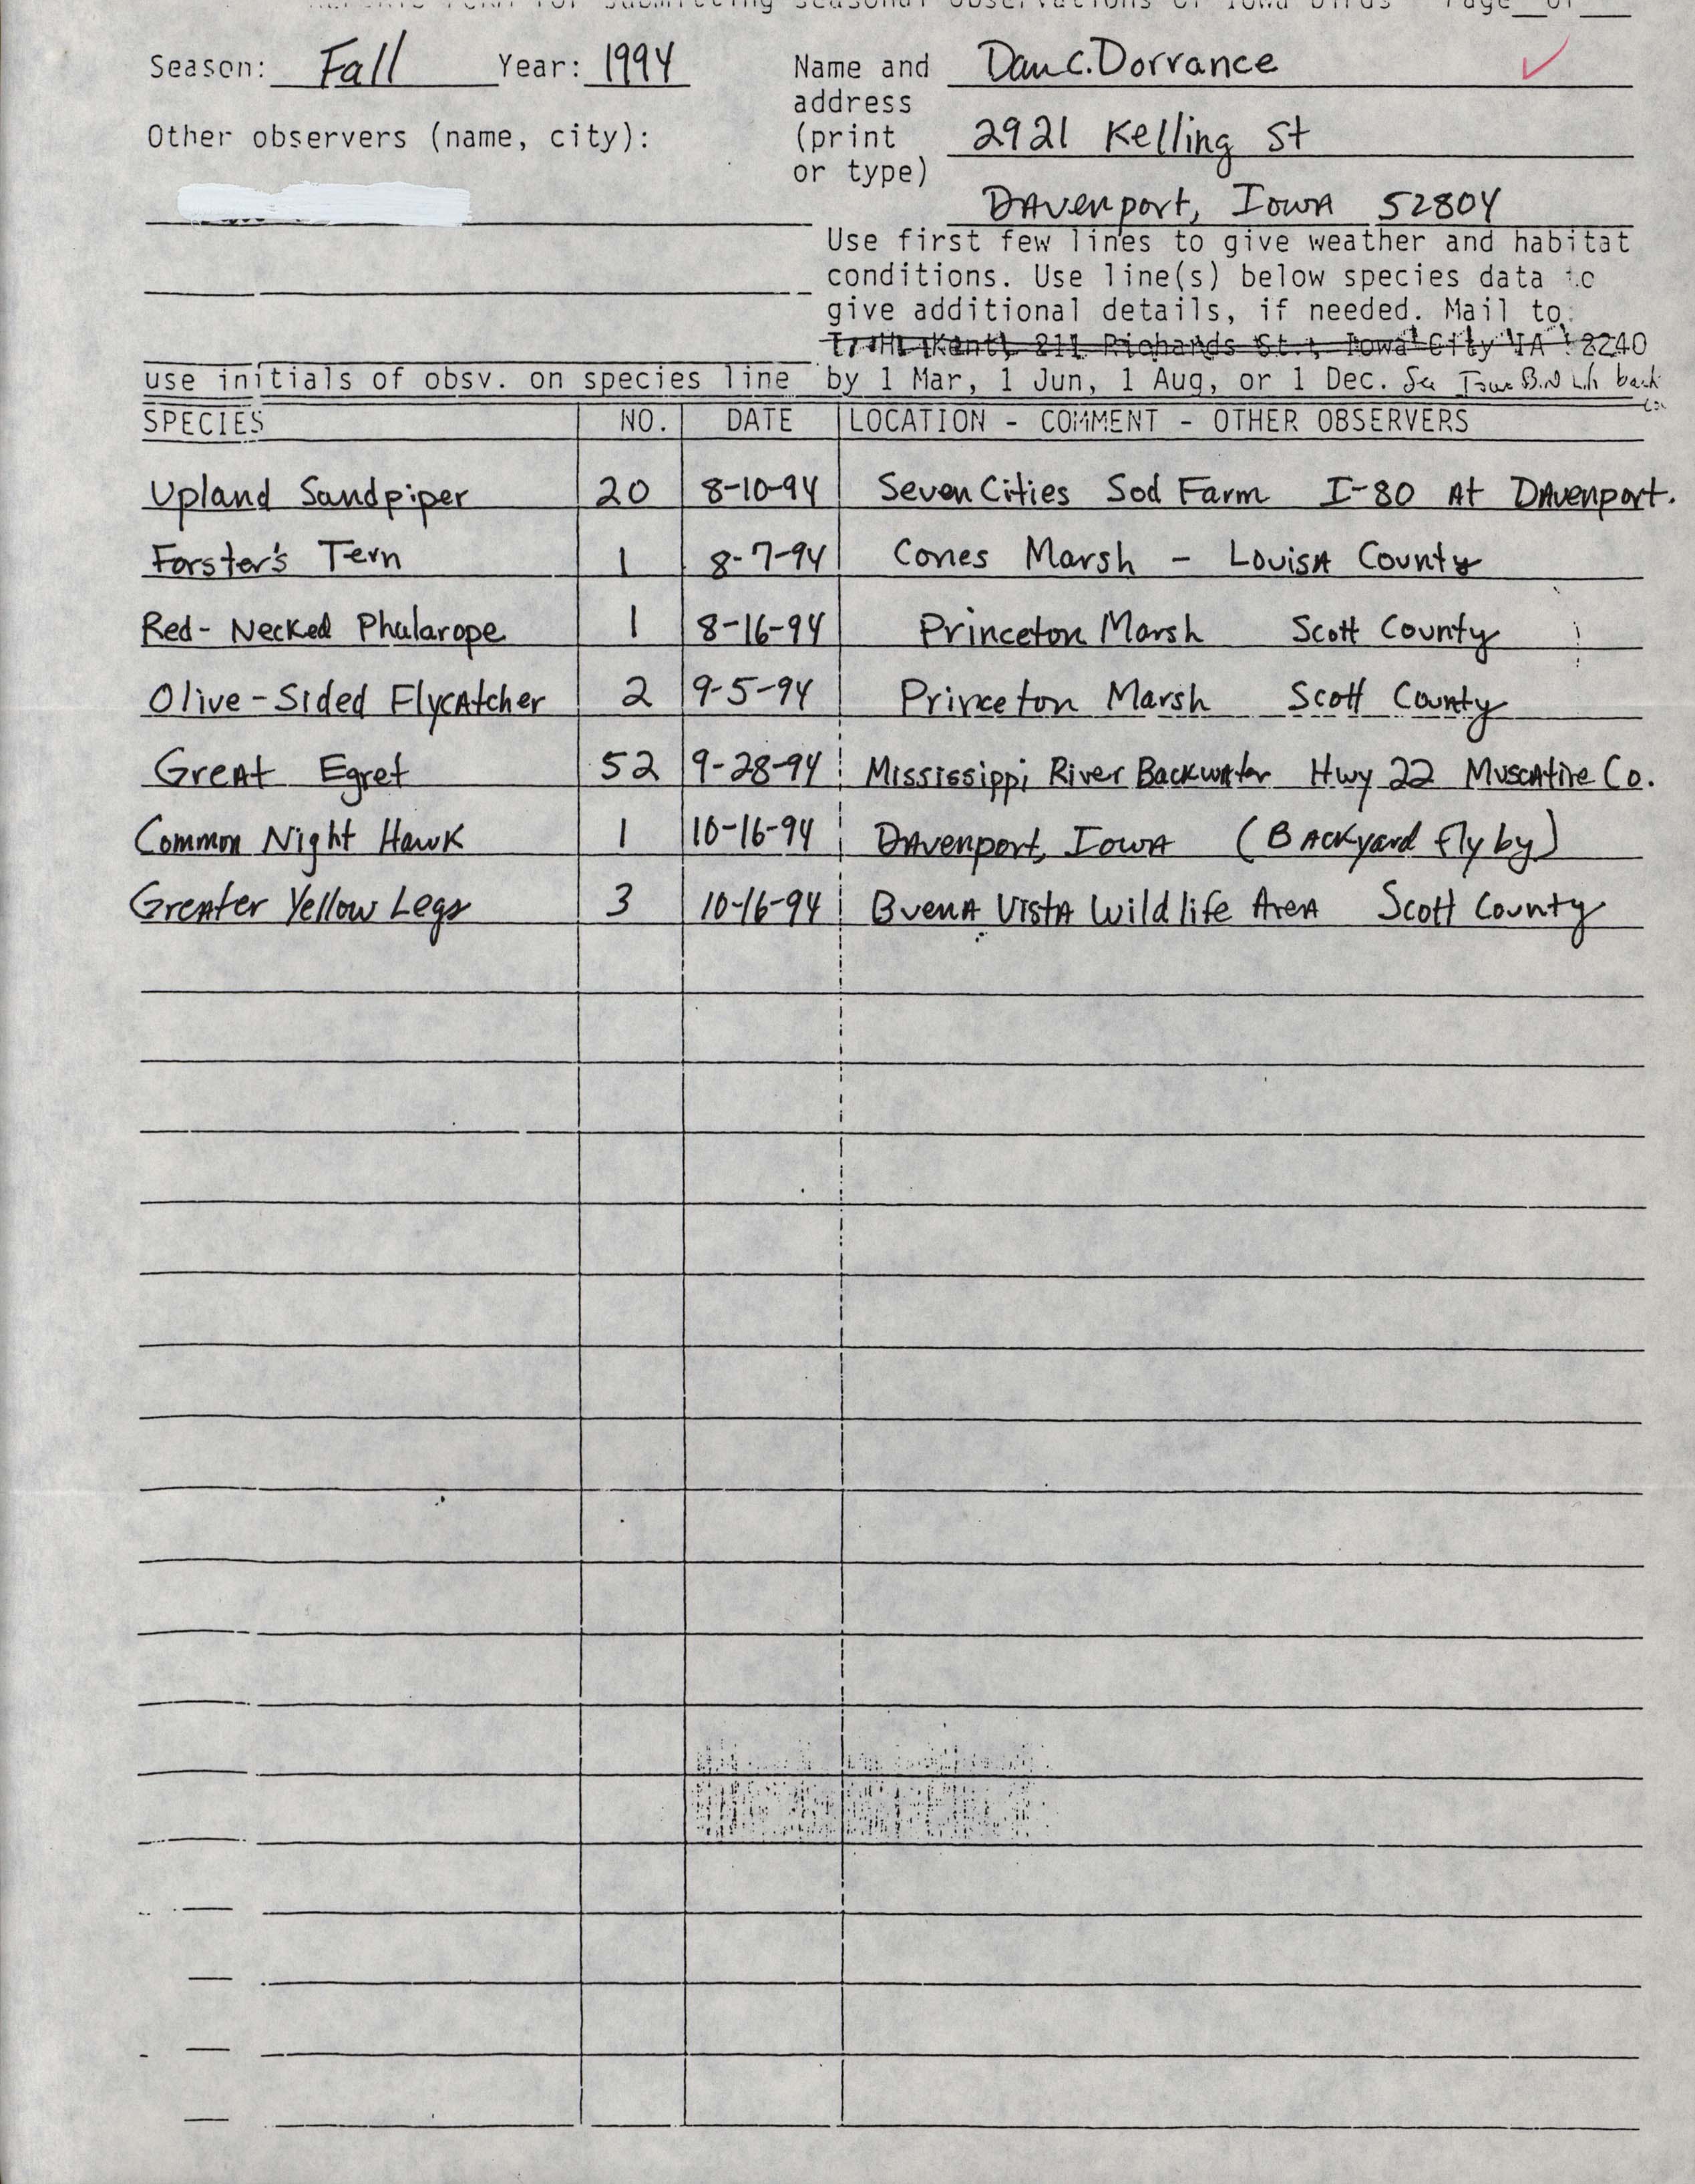 Field reports form for submitting seasonal observations of Iowa birds, Dan Dorrance, fall 1994